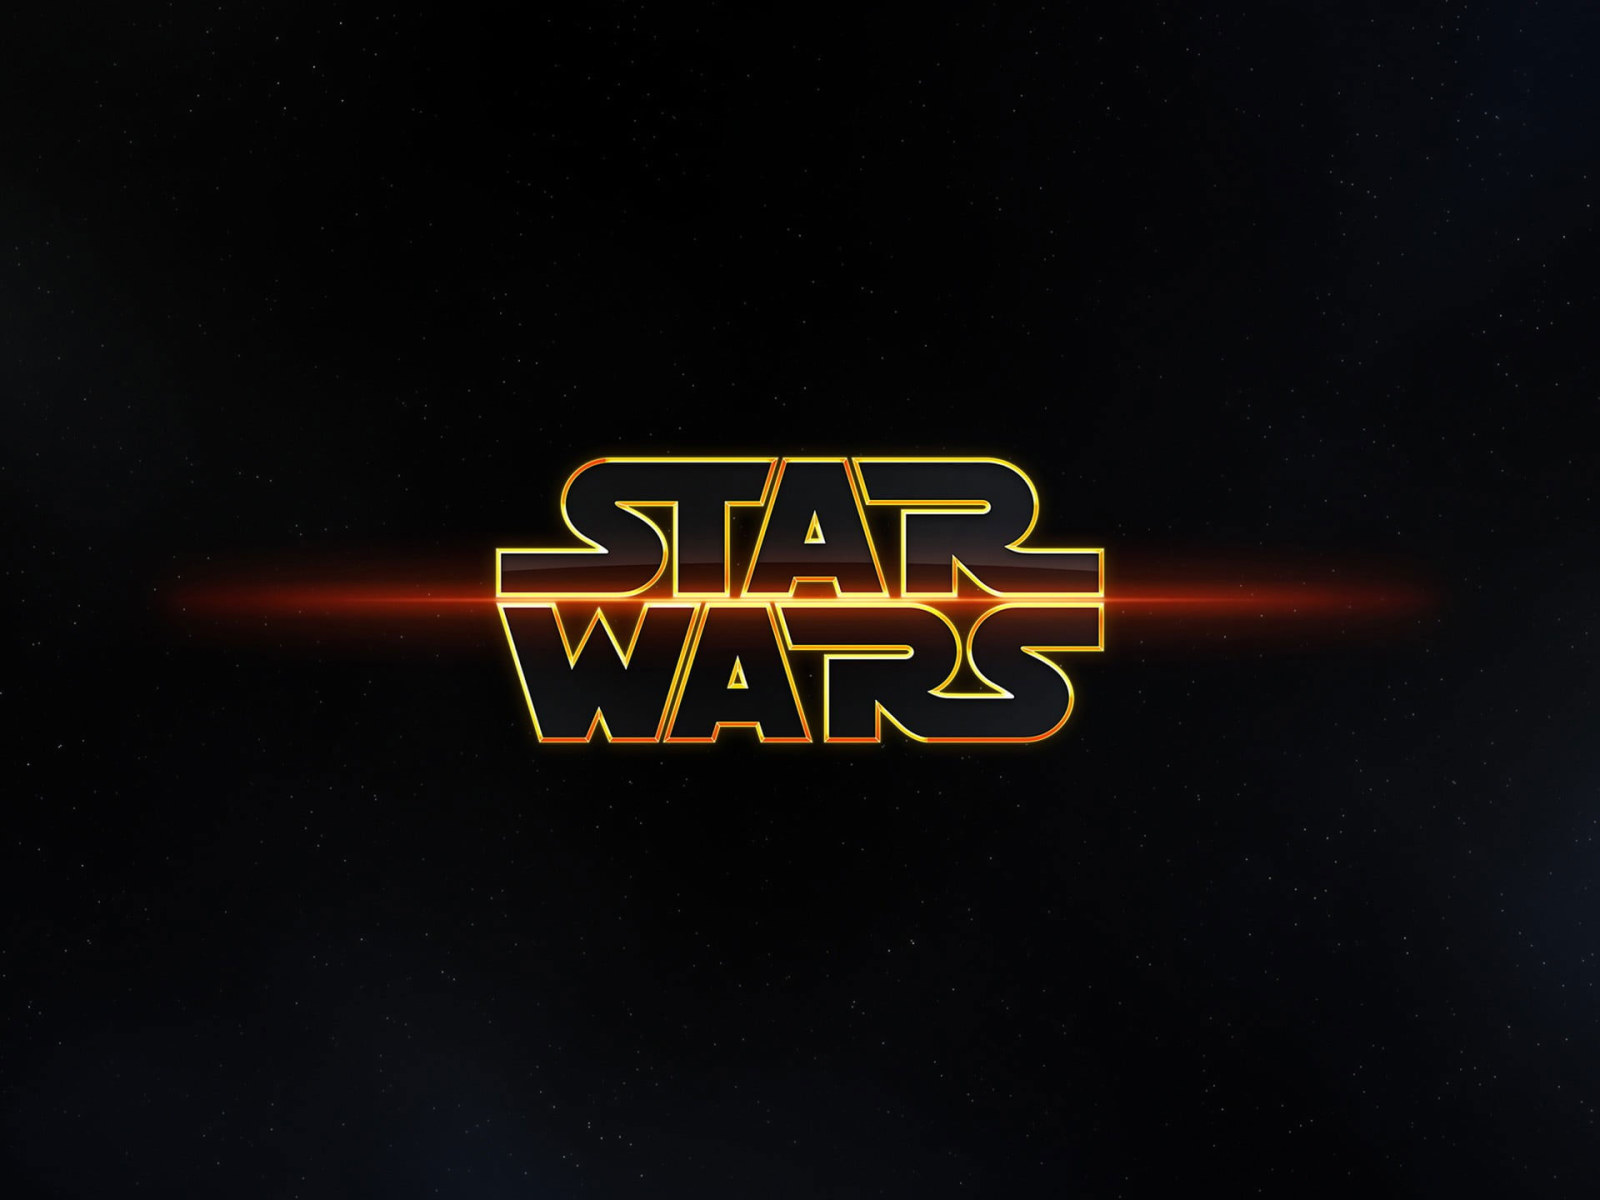 Star Wars Logo Wallpaper, Movies, Science Fiction, Typography, Neon, Illuminated • Wallpaper For You